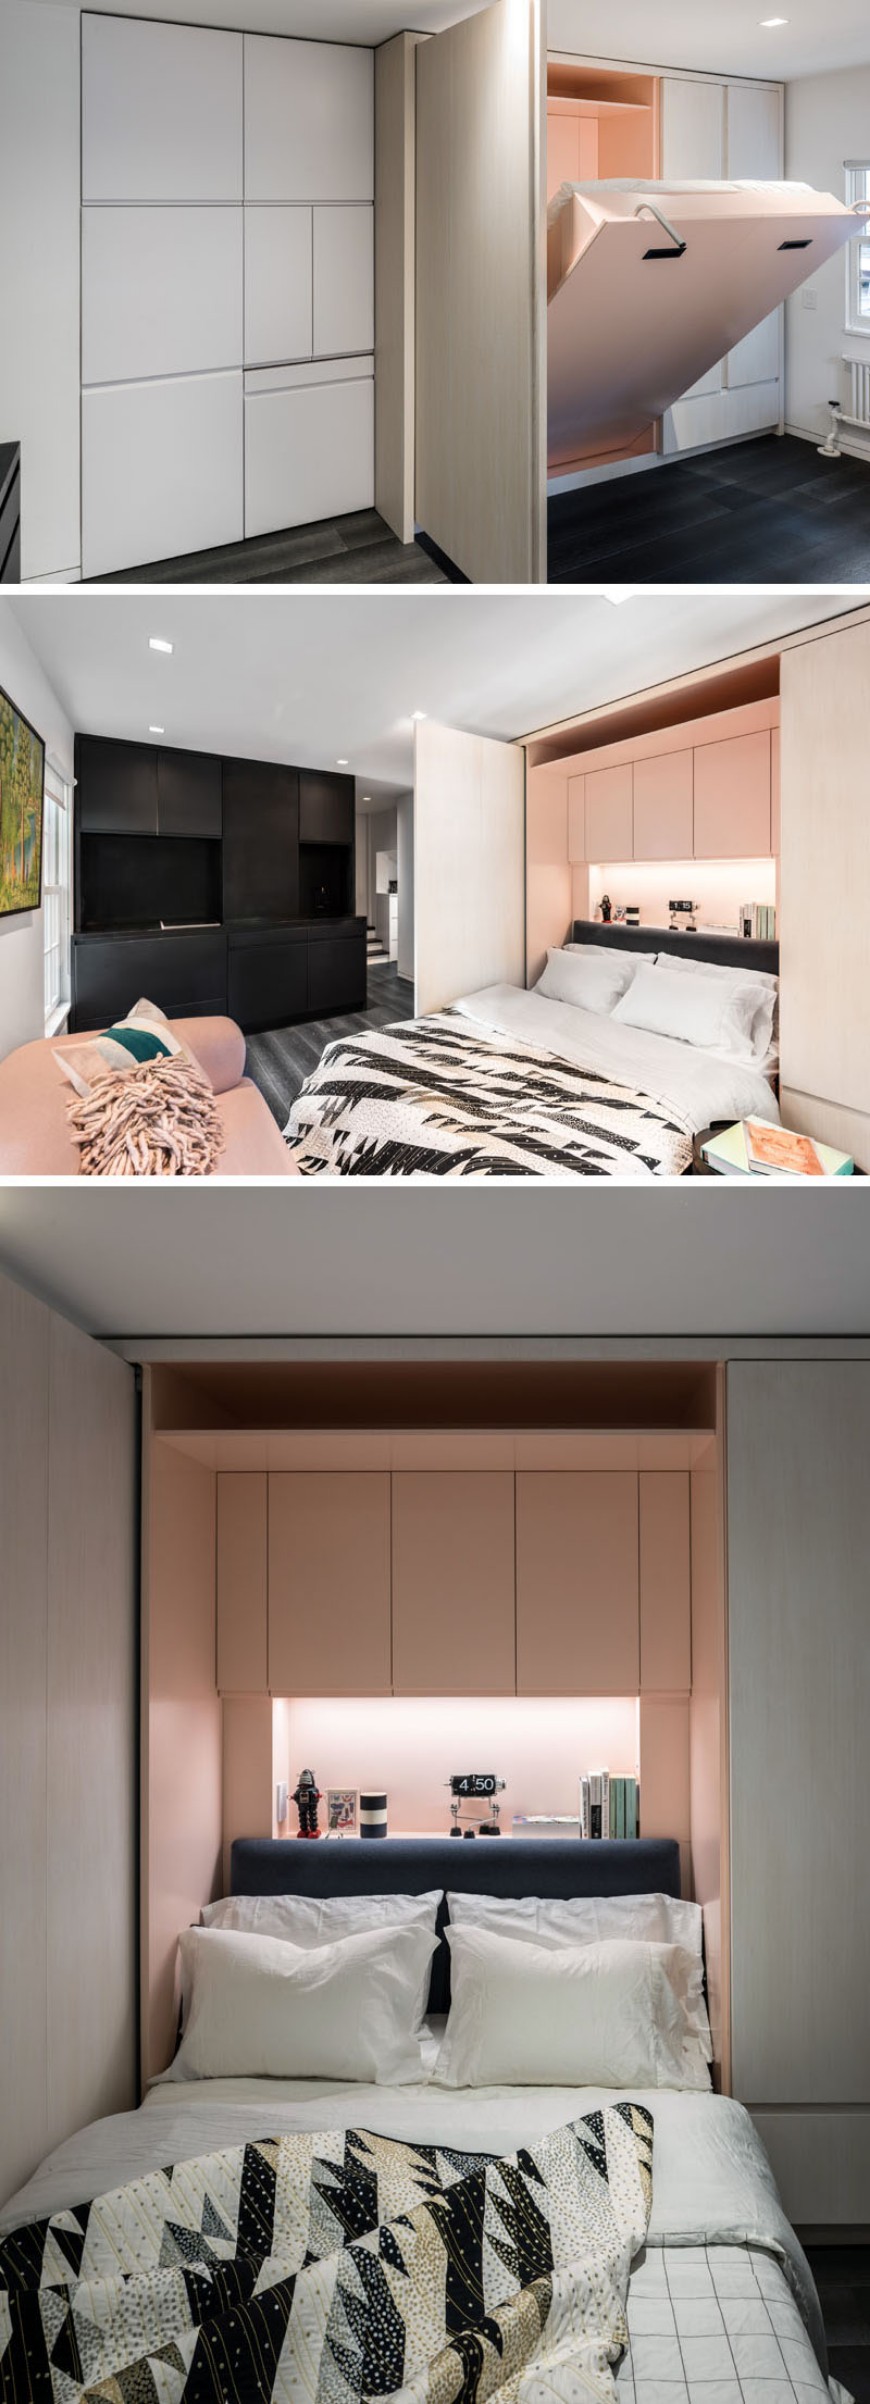 This Small Modern Apartment Has A Wall Of Hidden Uses (8)